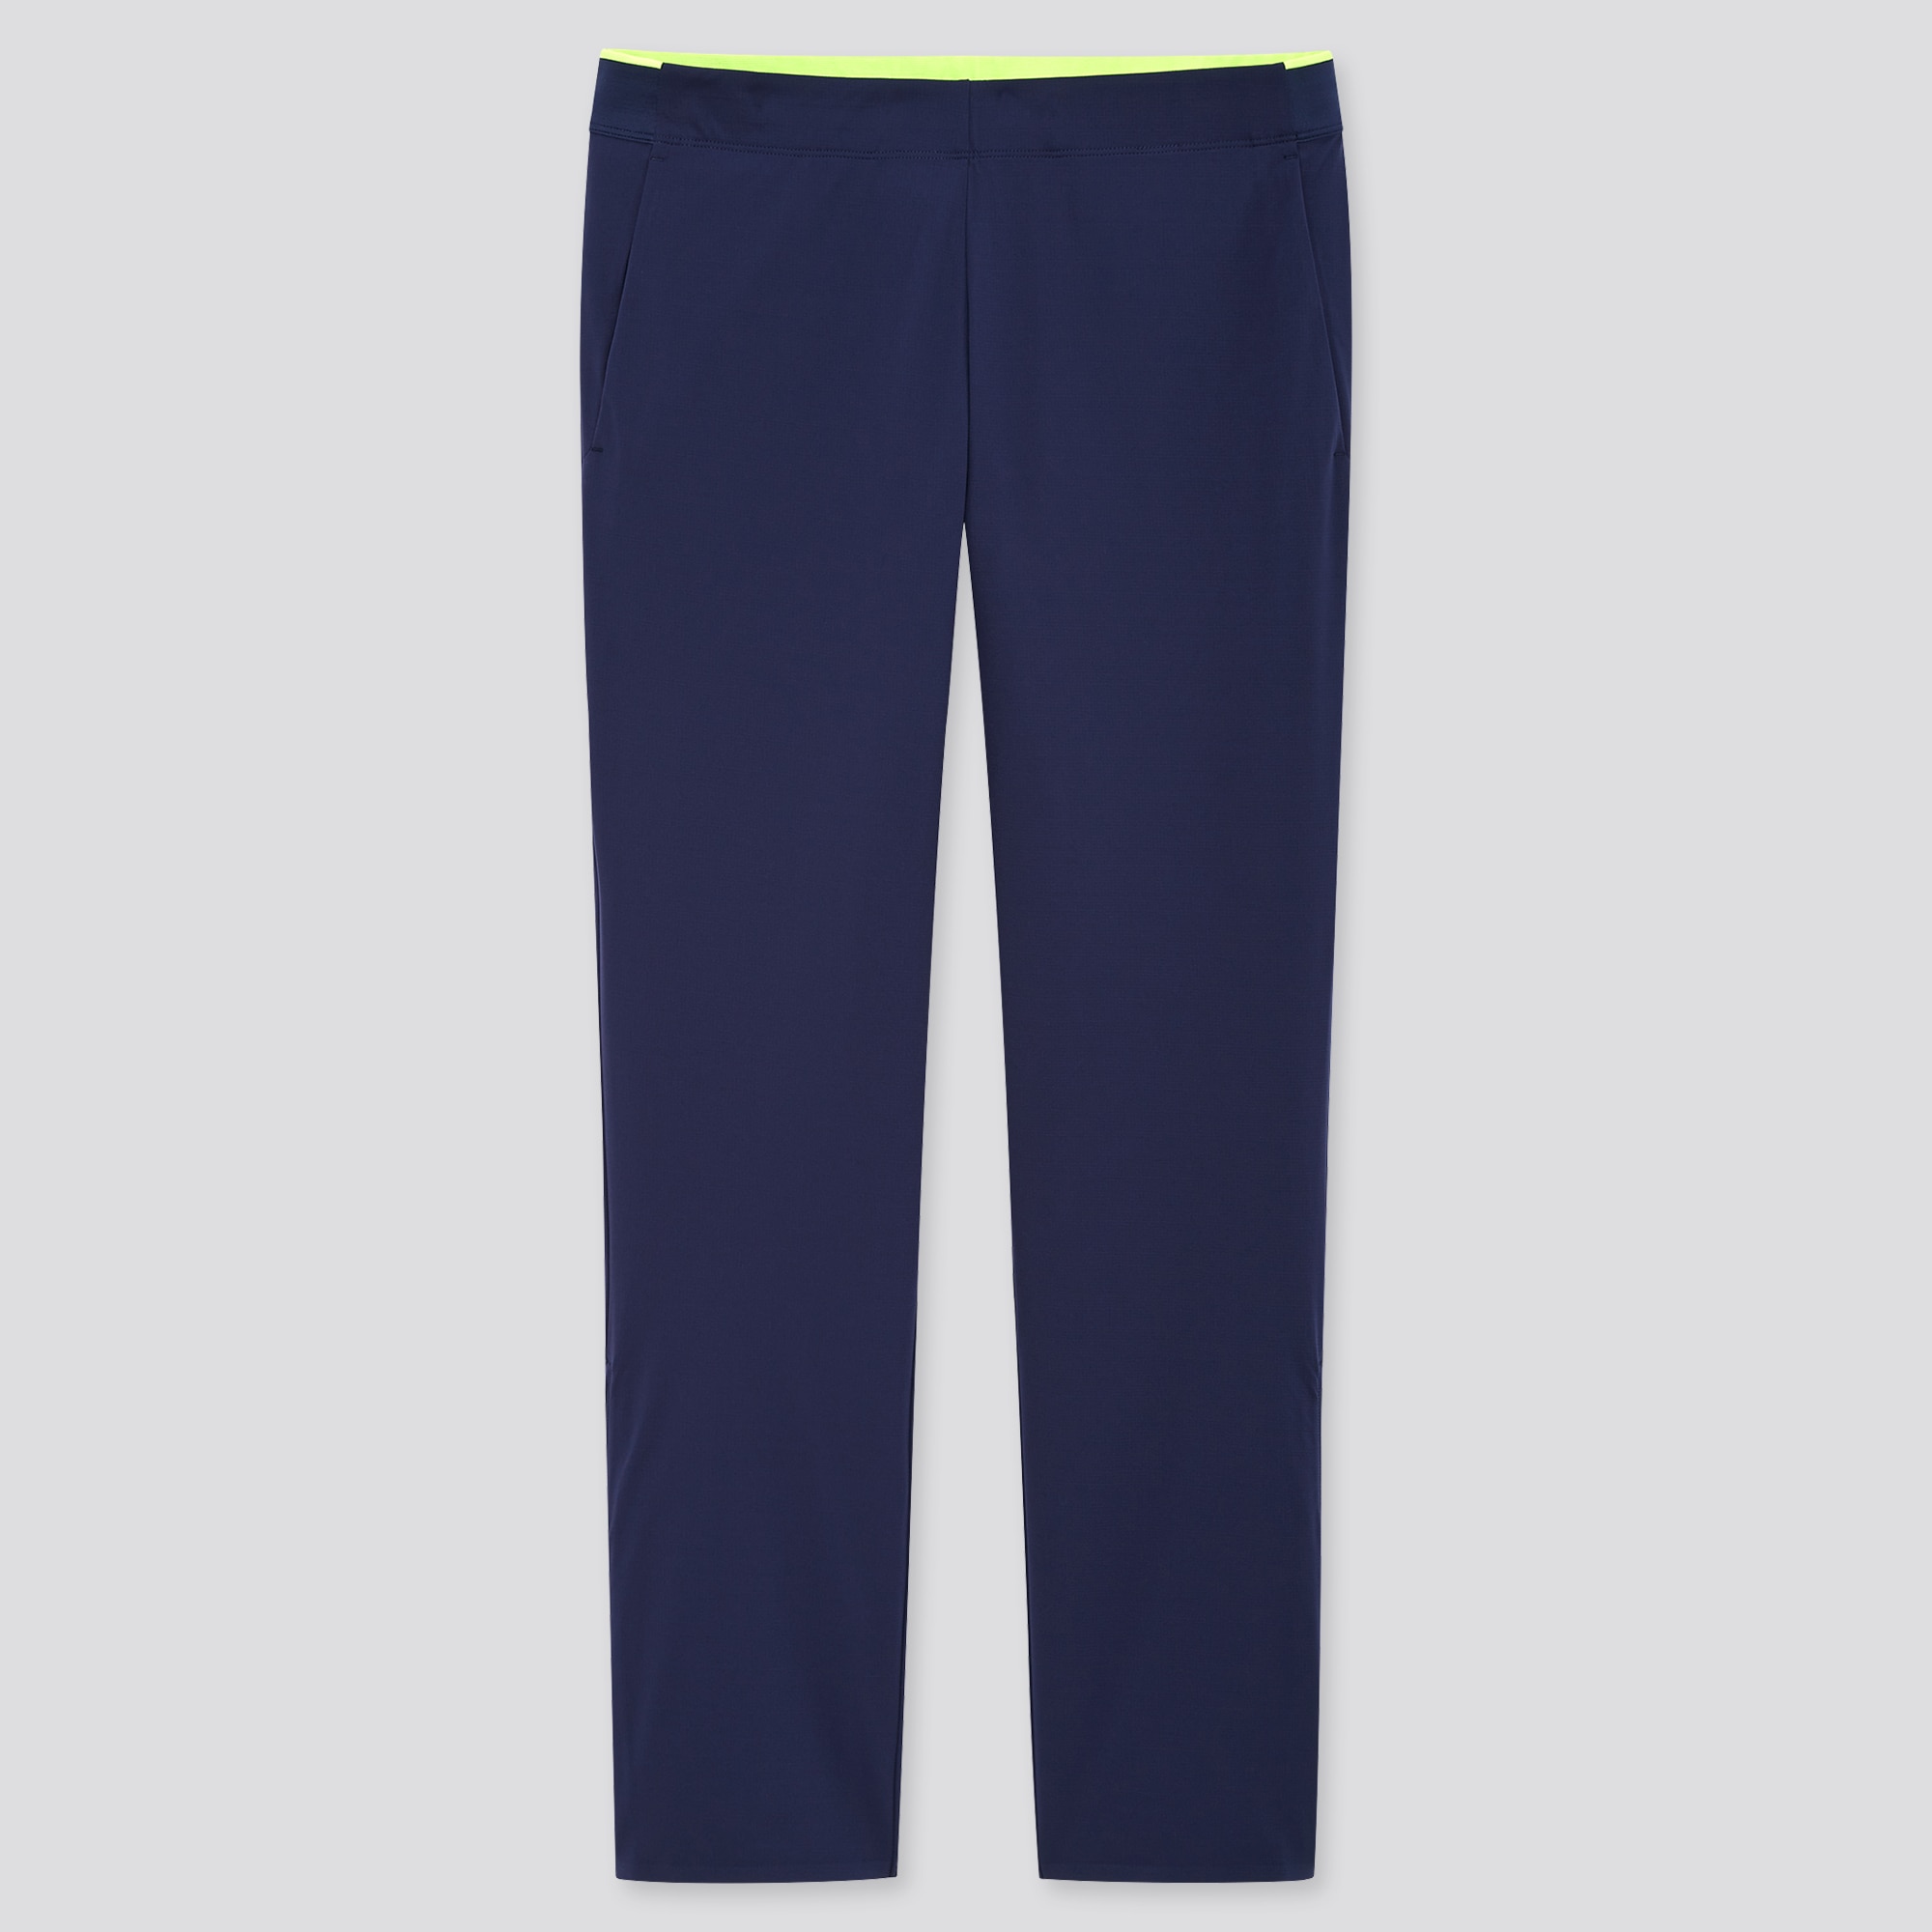 Uniqlo Ultra Stretch Dry Sweat Pants Mens Fashion Bottoms Trousers on  Carousell